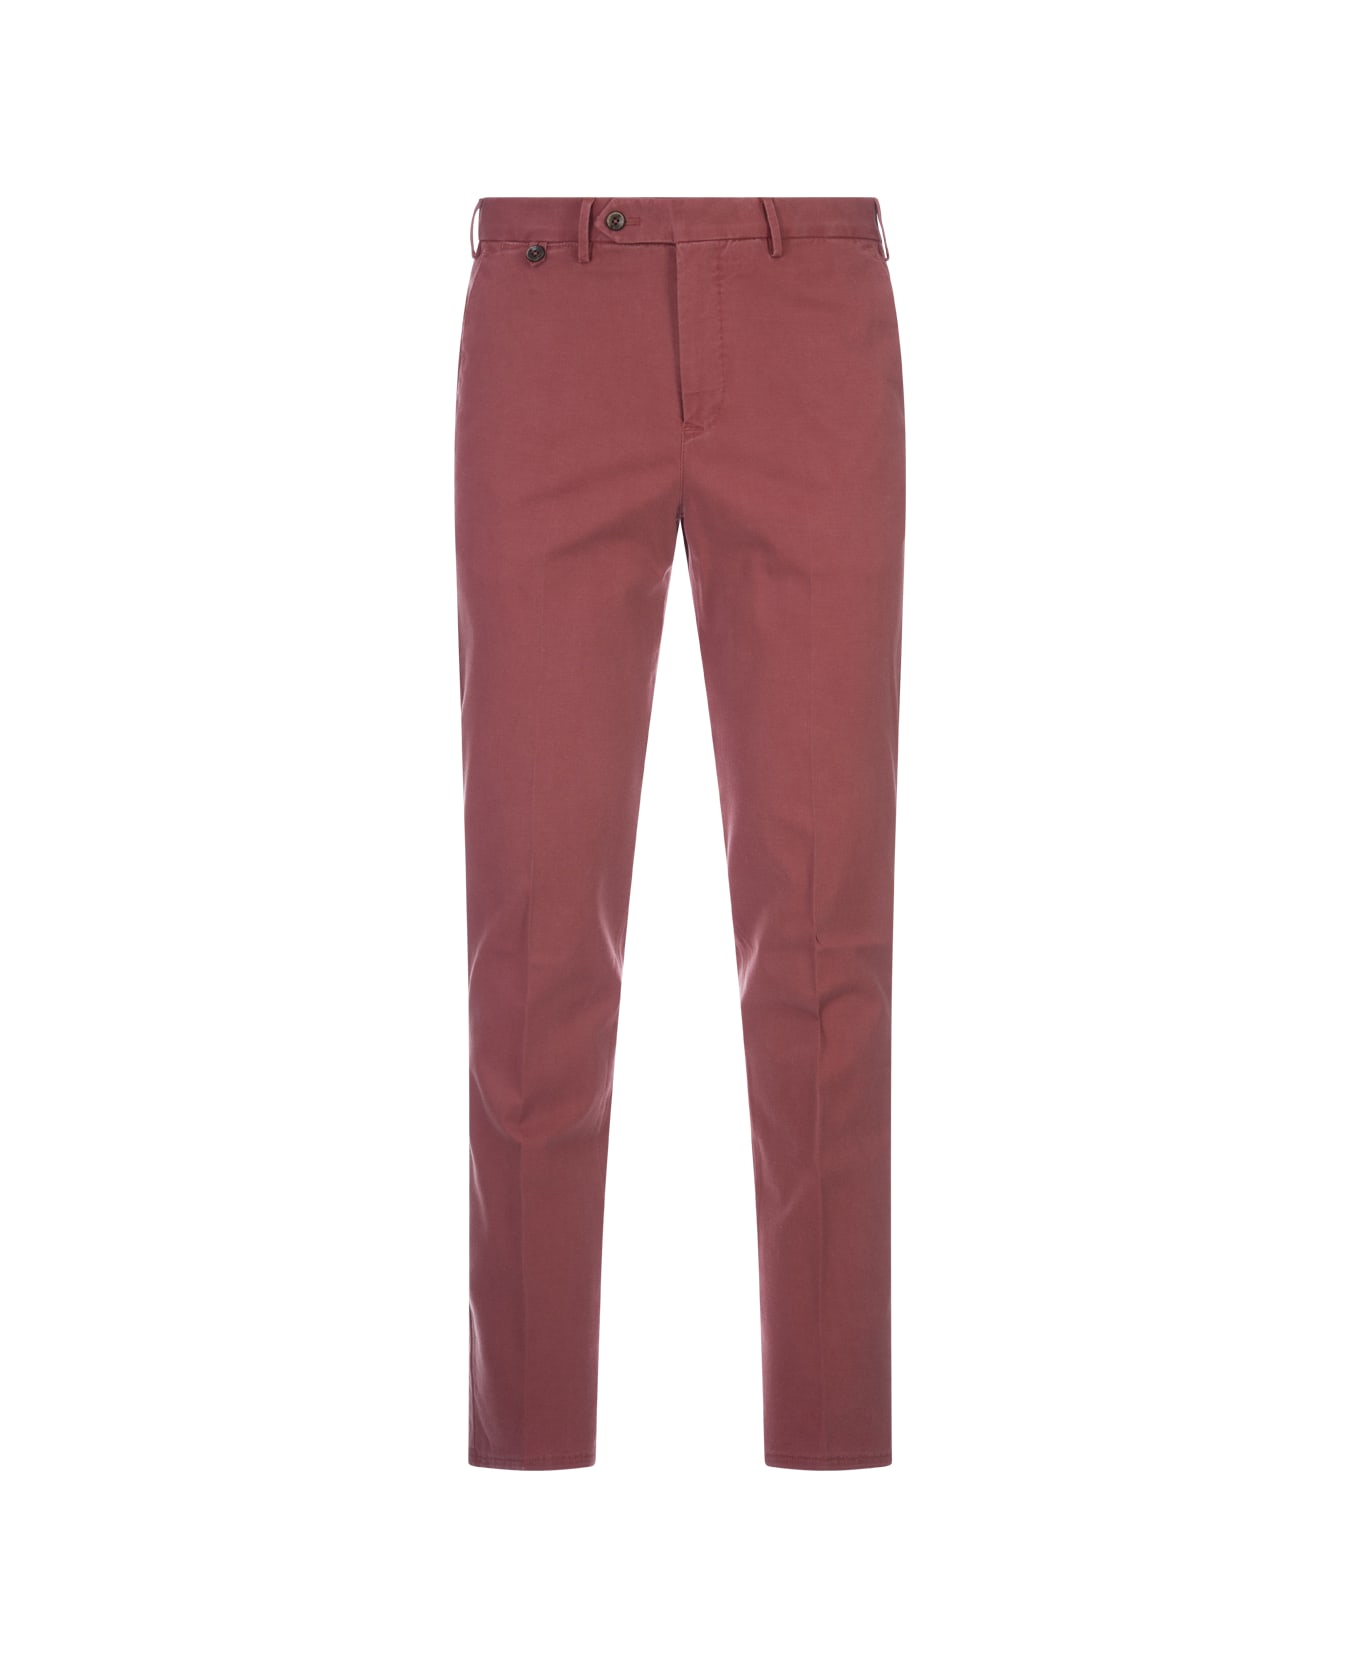 PT Torino Red Stretch Fabric Master Fit Trousers - Red